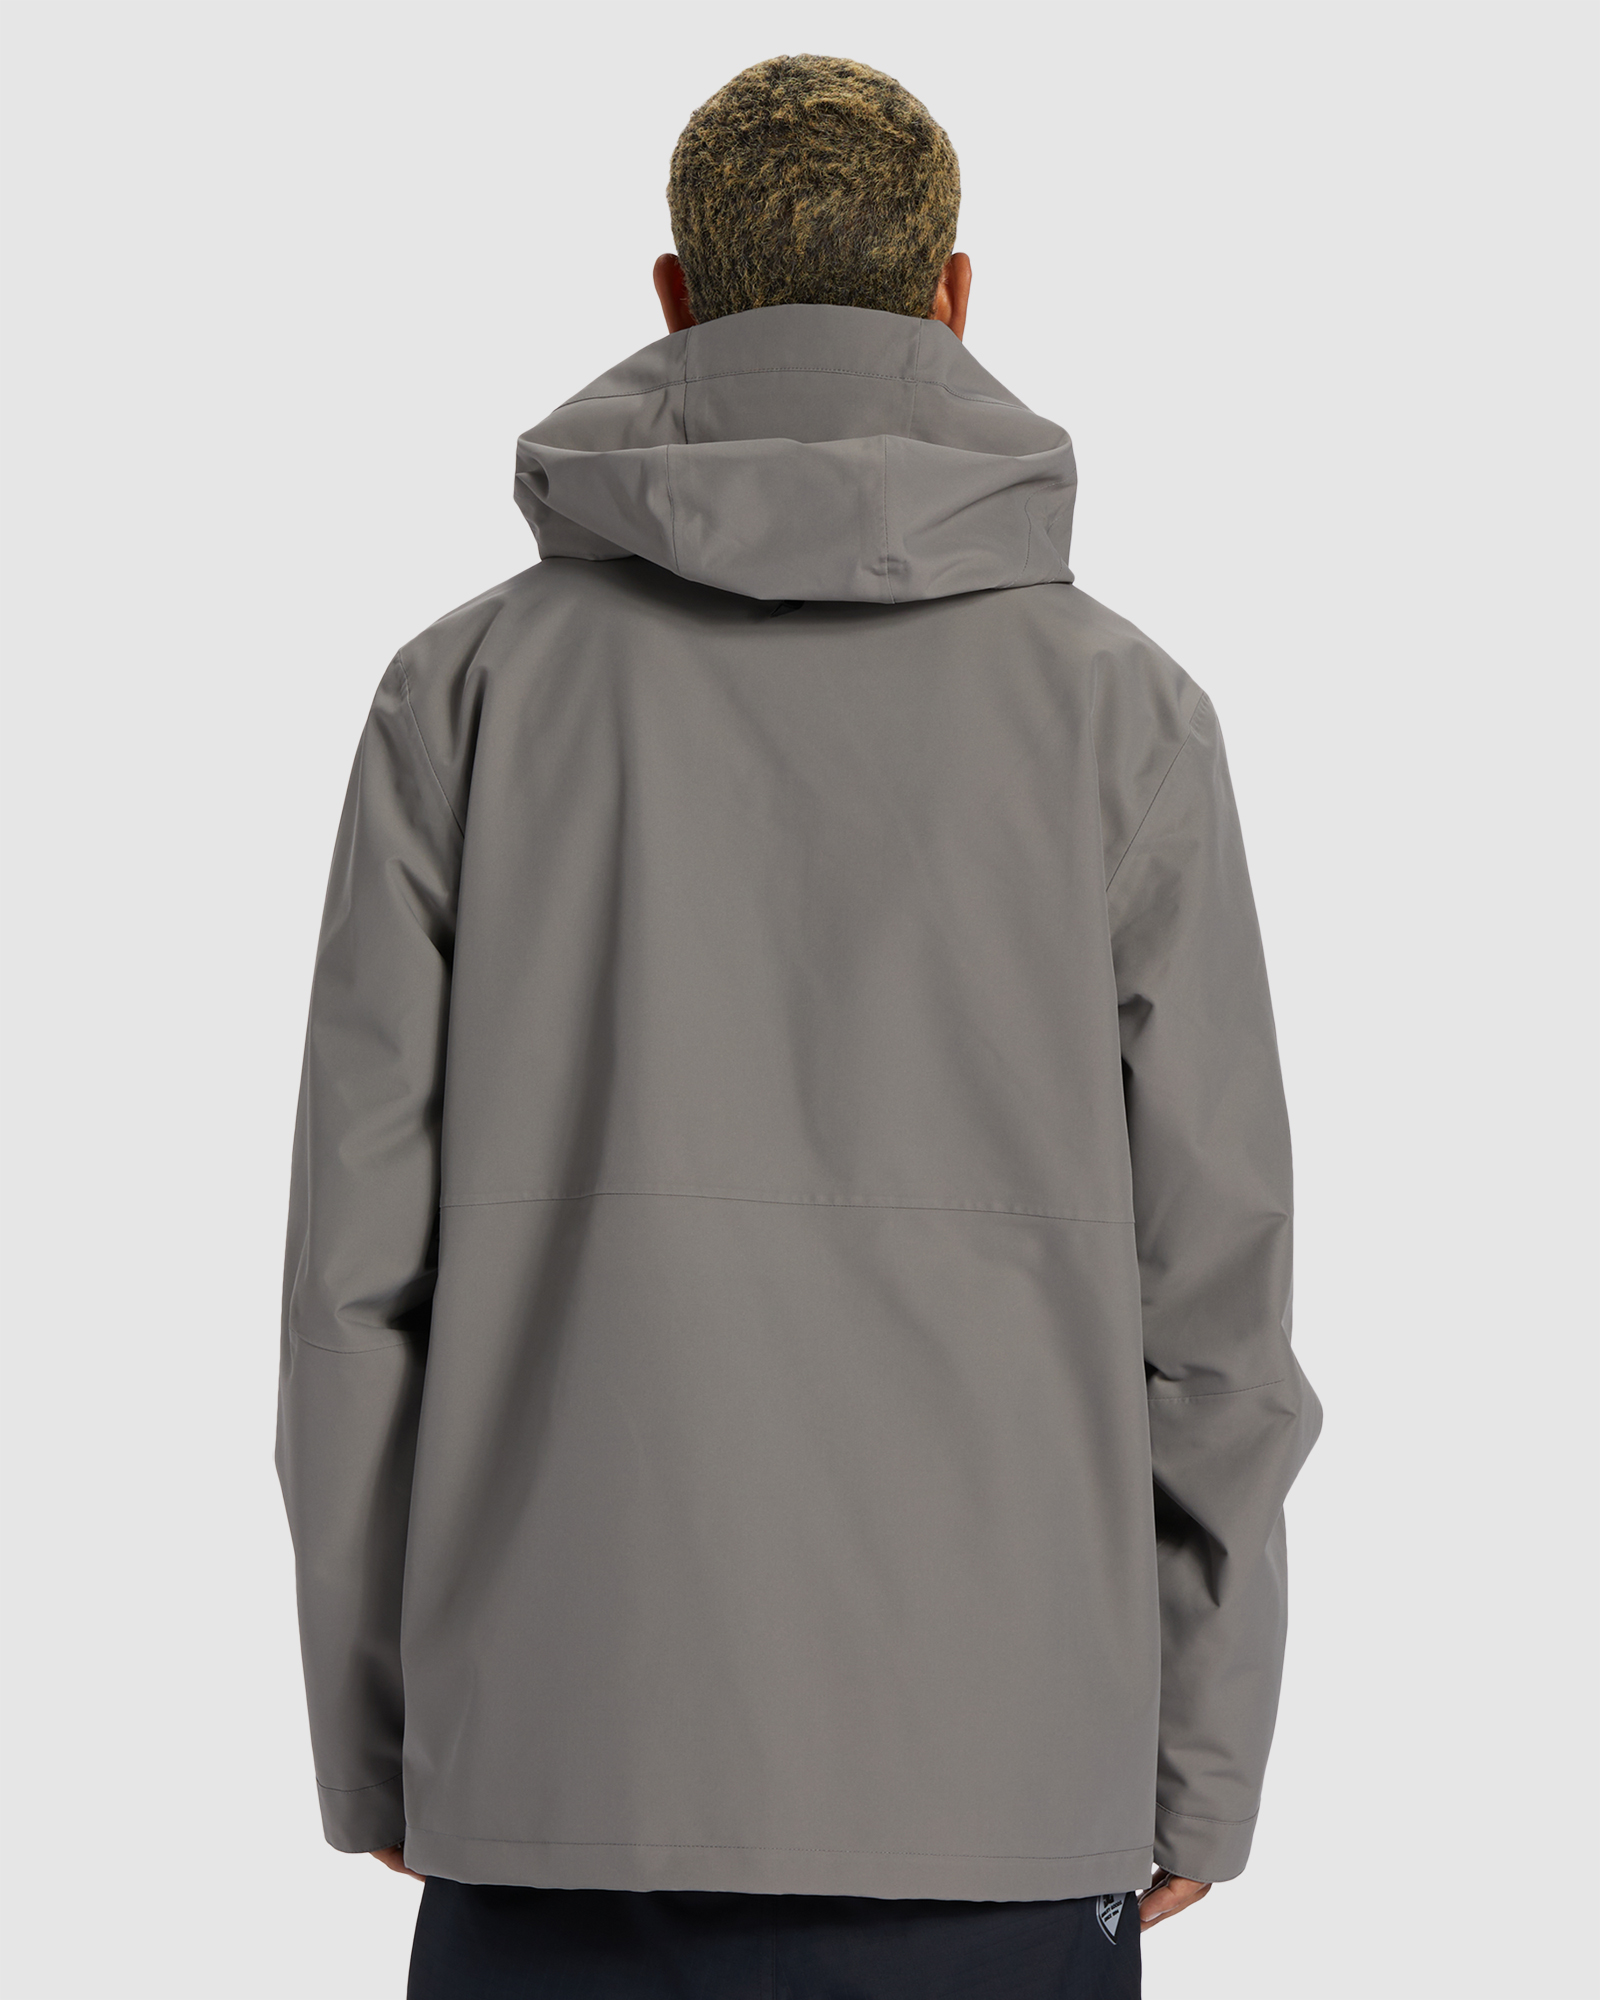 Dc Shoes Basis 30K - Technical Snow Jacket For Men - Pewter | SurfStitch